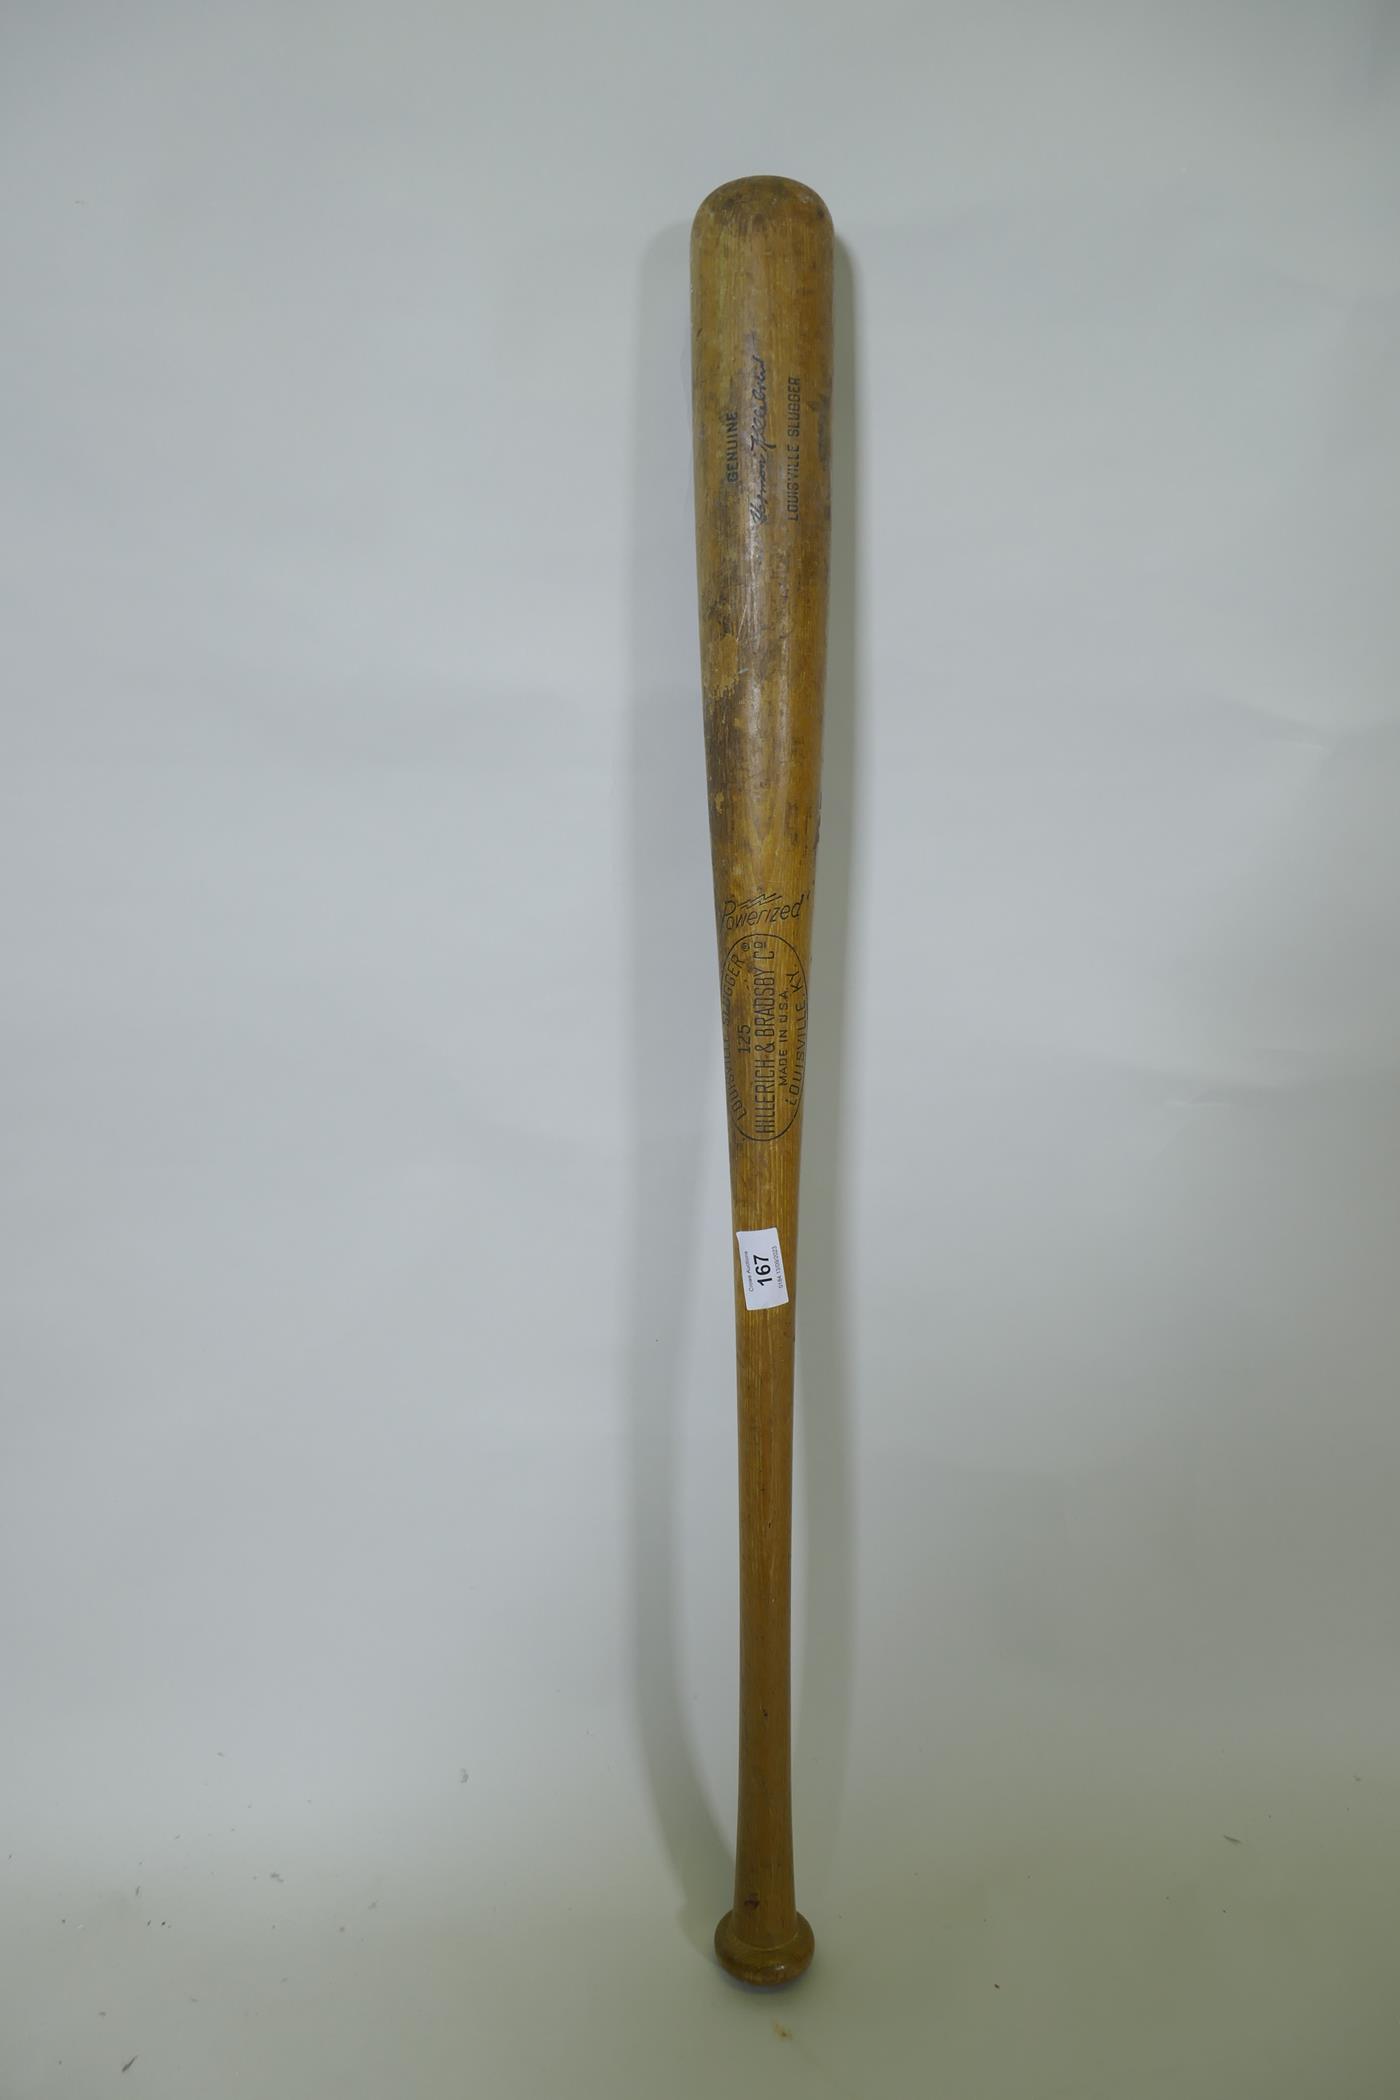 A genuine 'Louisville Slugger' baseball bat, No 125, Hillerich and Bradsby Co, Louisville, KY - Image 2 of 4